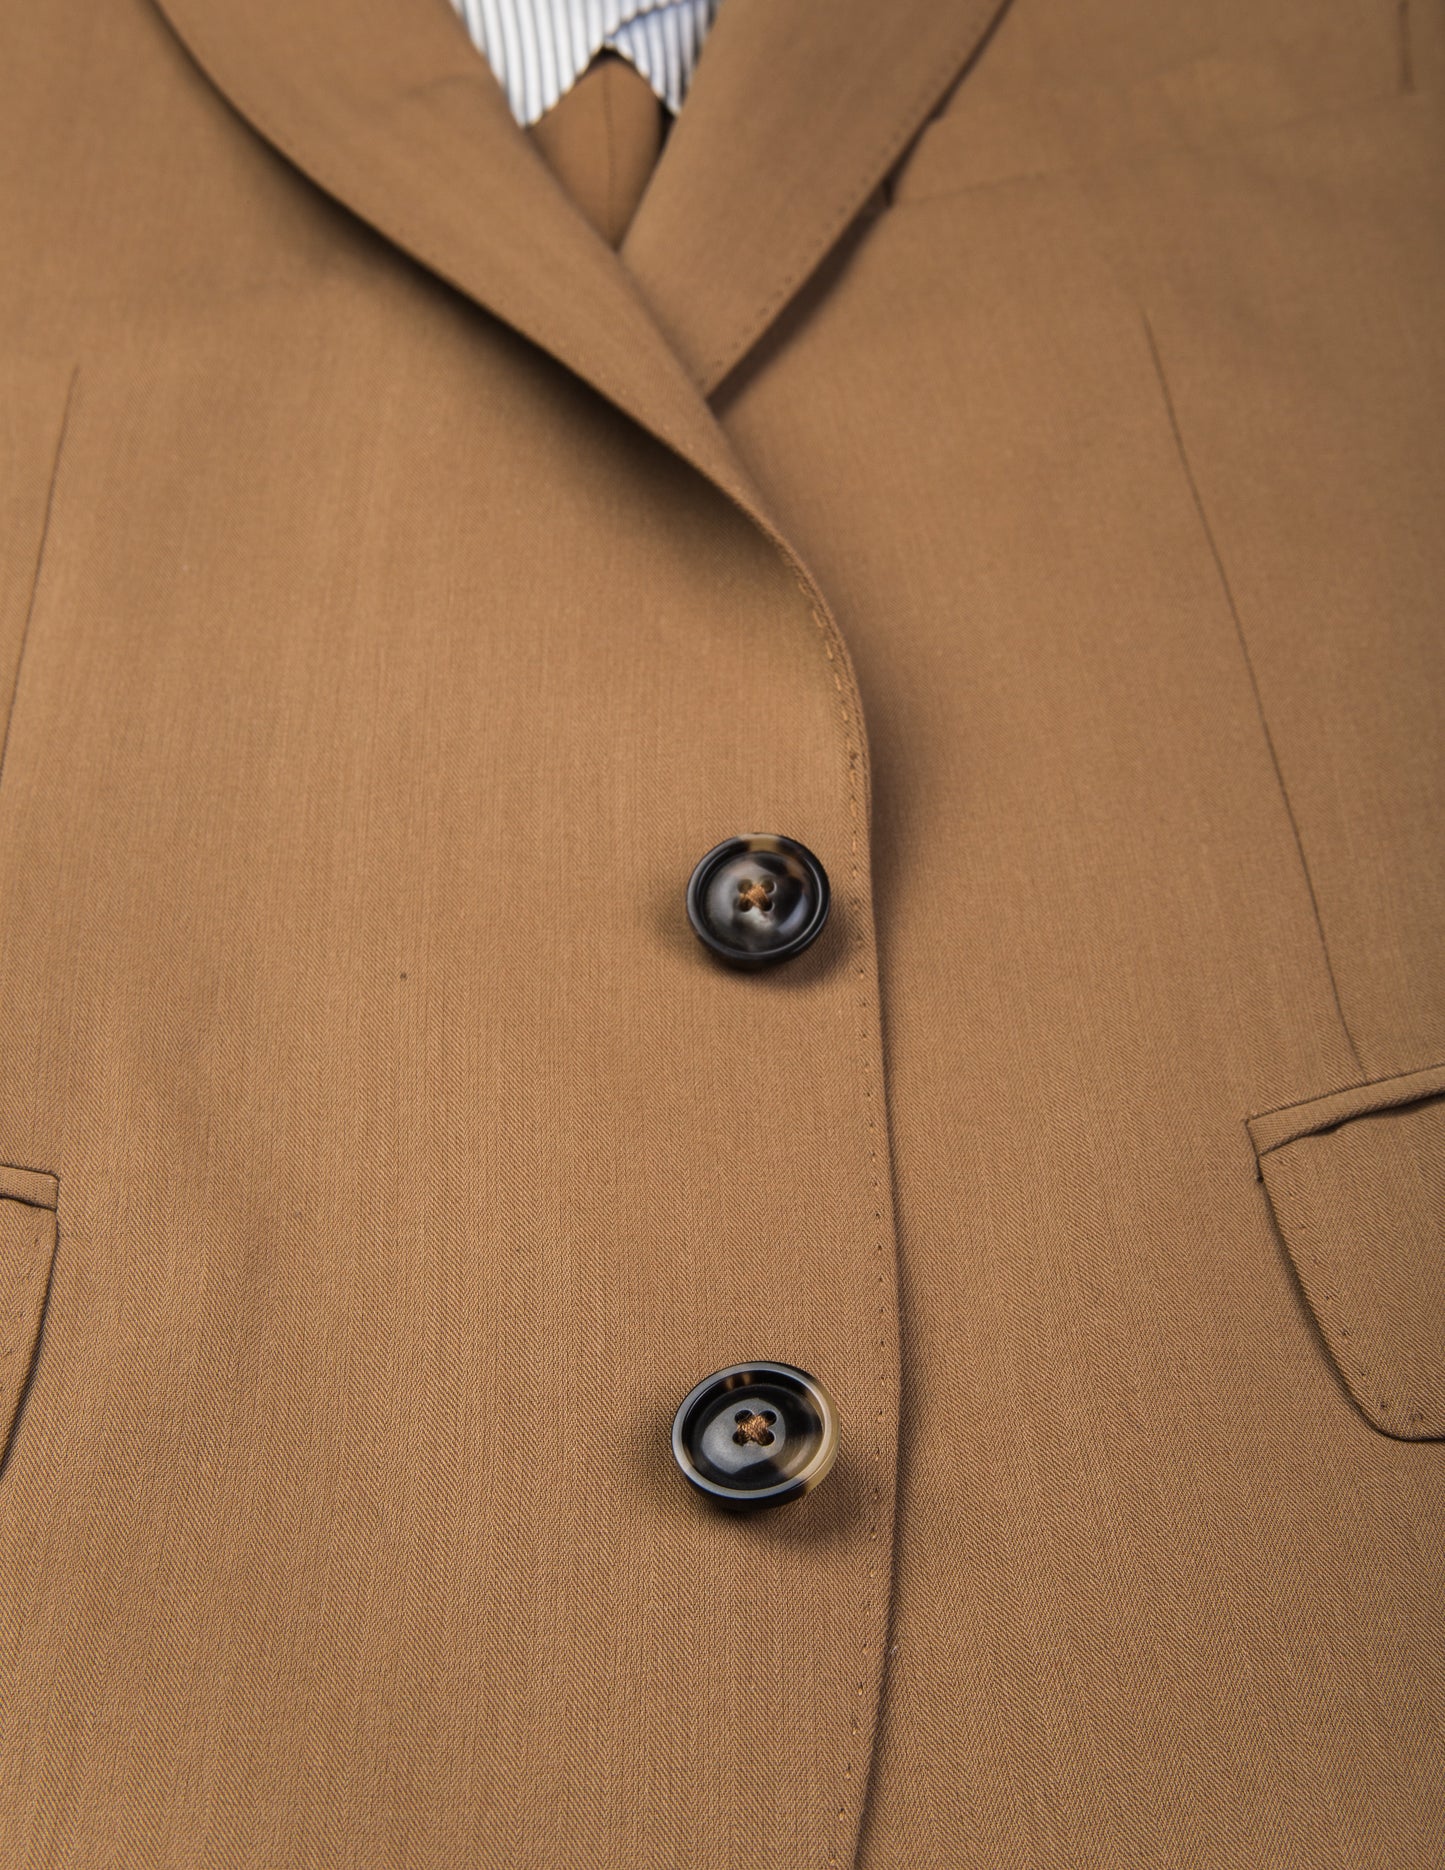 Detail of BKT50 Tailored Blazer in Herringbone Wool/Cotton - Tobacco showing buttons